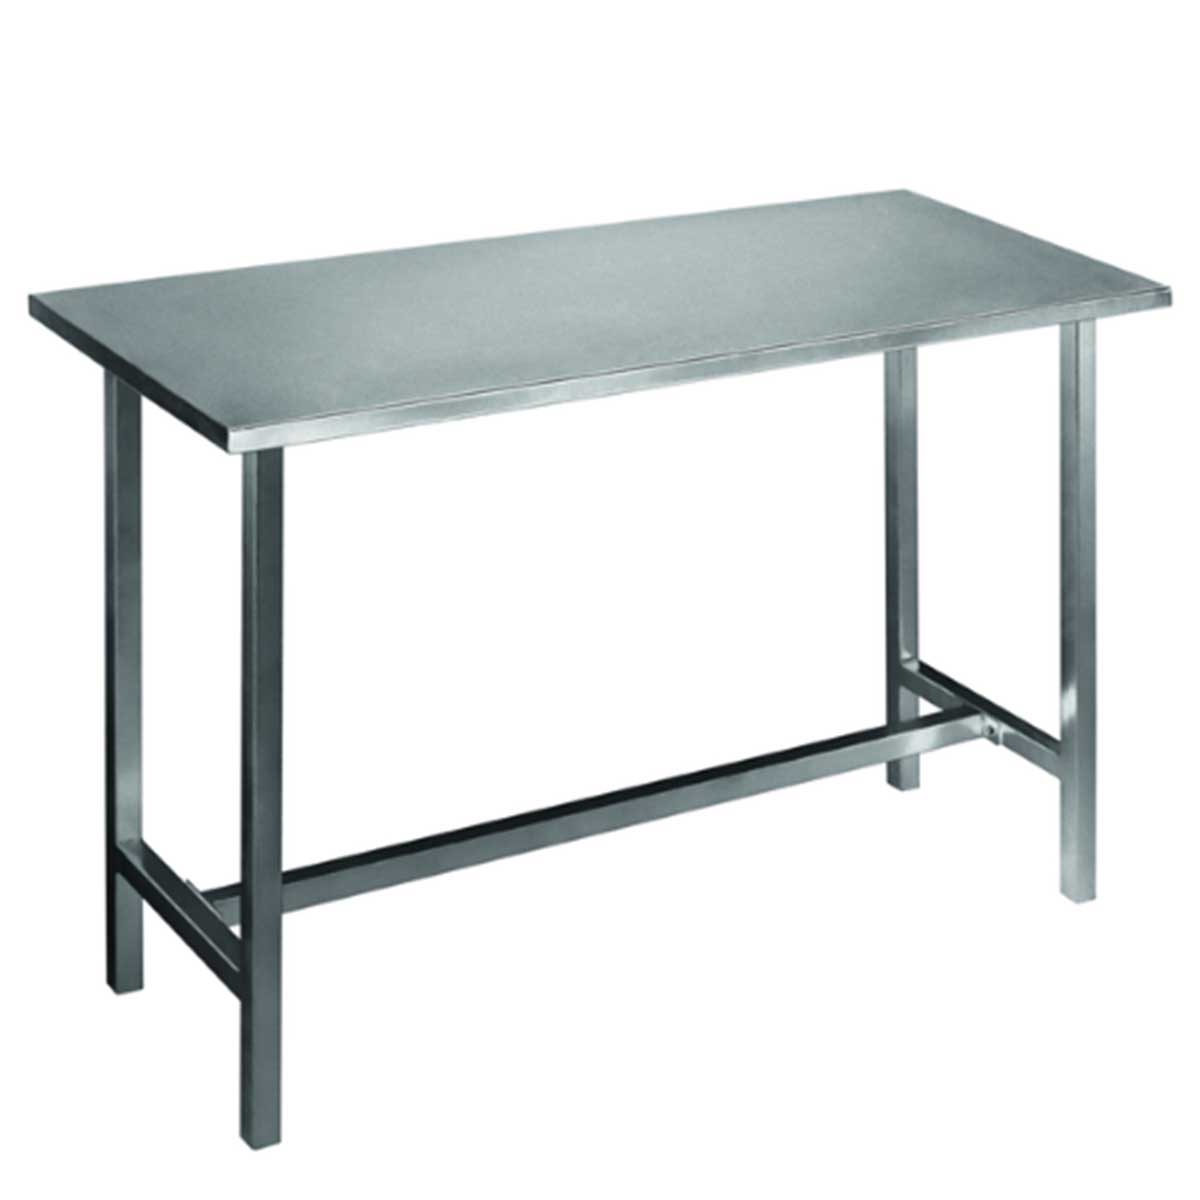 Metal Office Table Manufacturers, Suppliers in Dwarka Mor